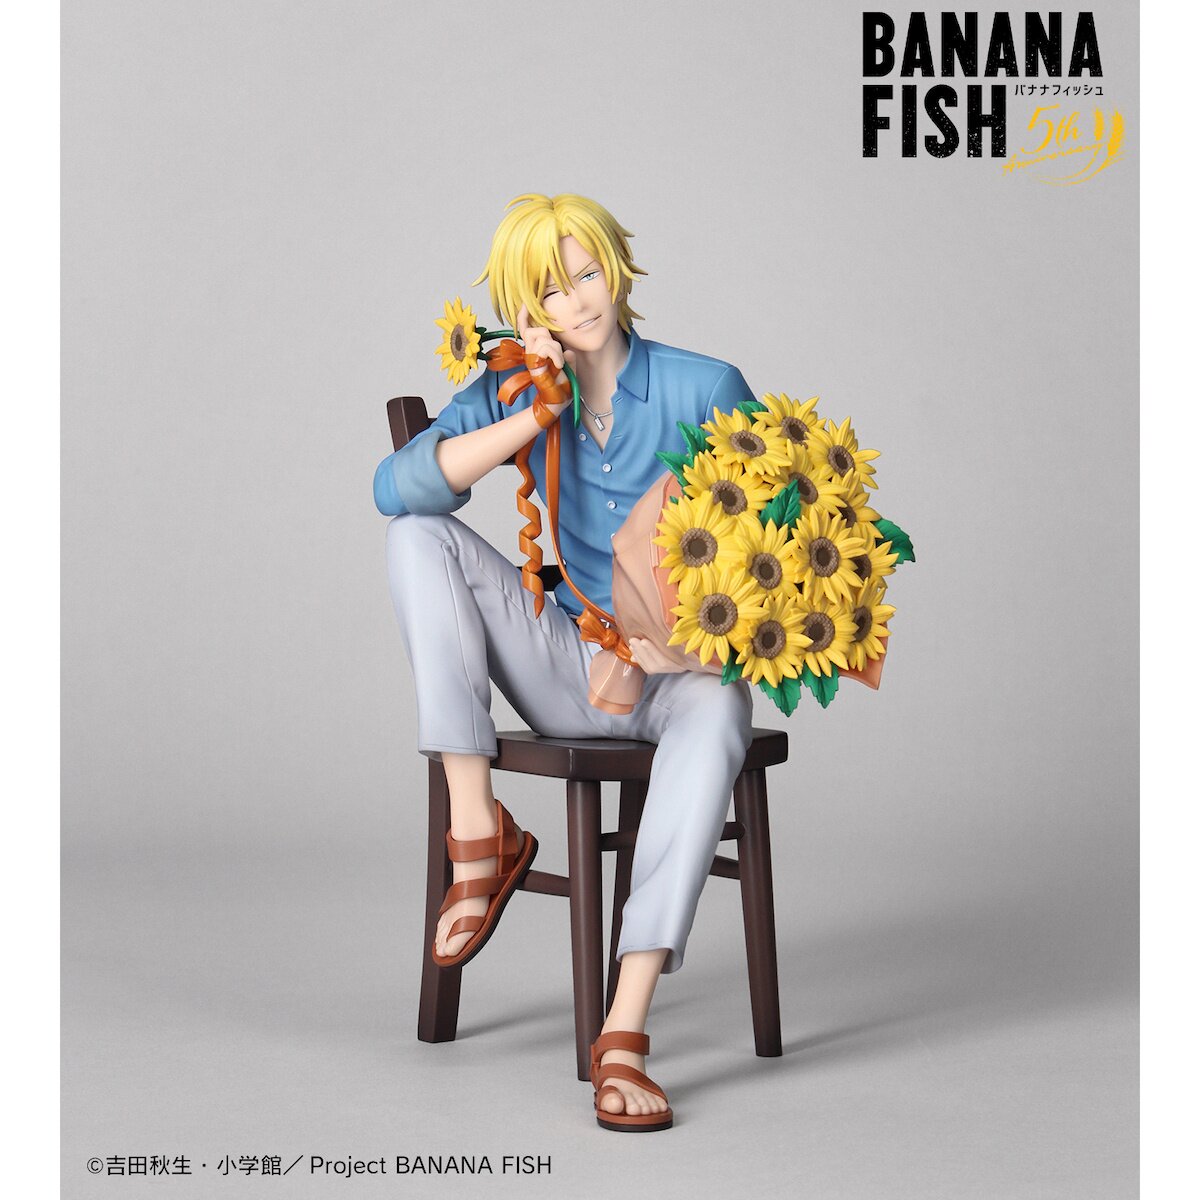 Banana Fish TV Anime on the Way from Free! Director